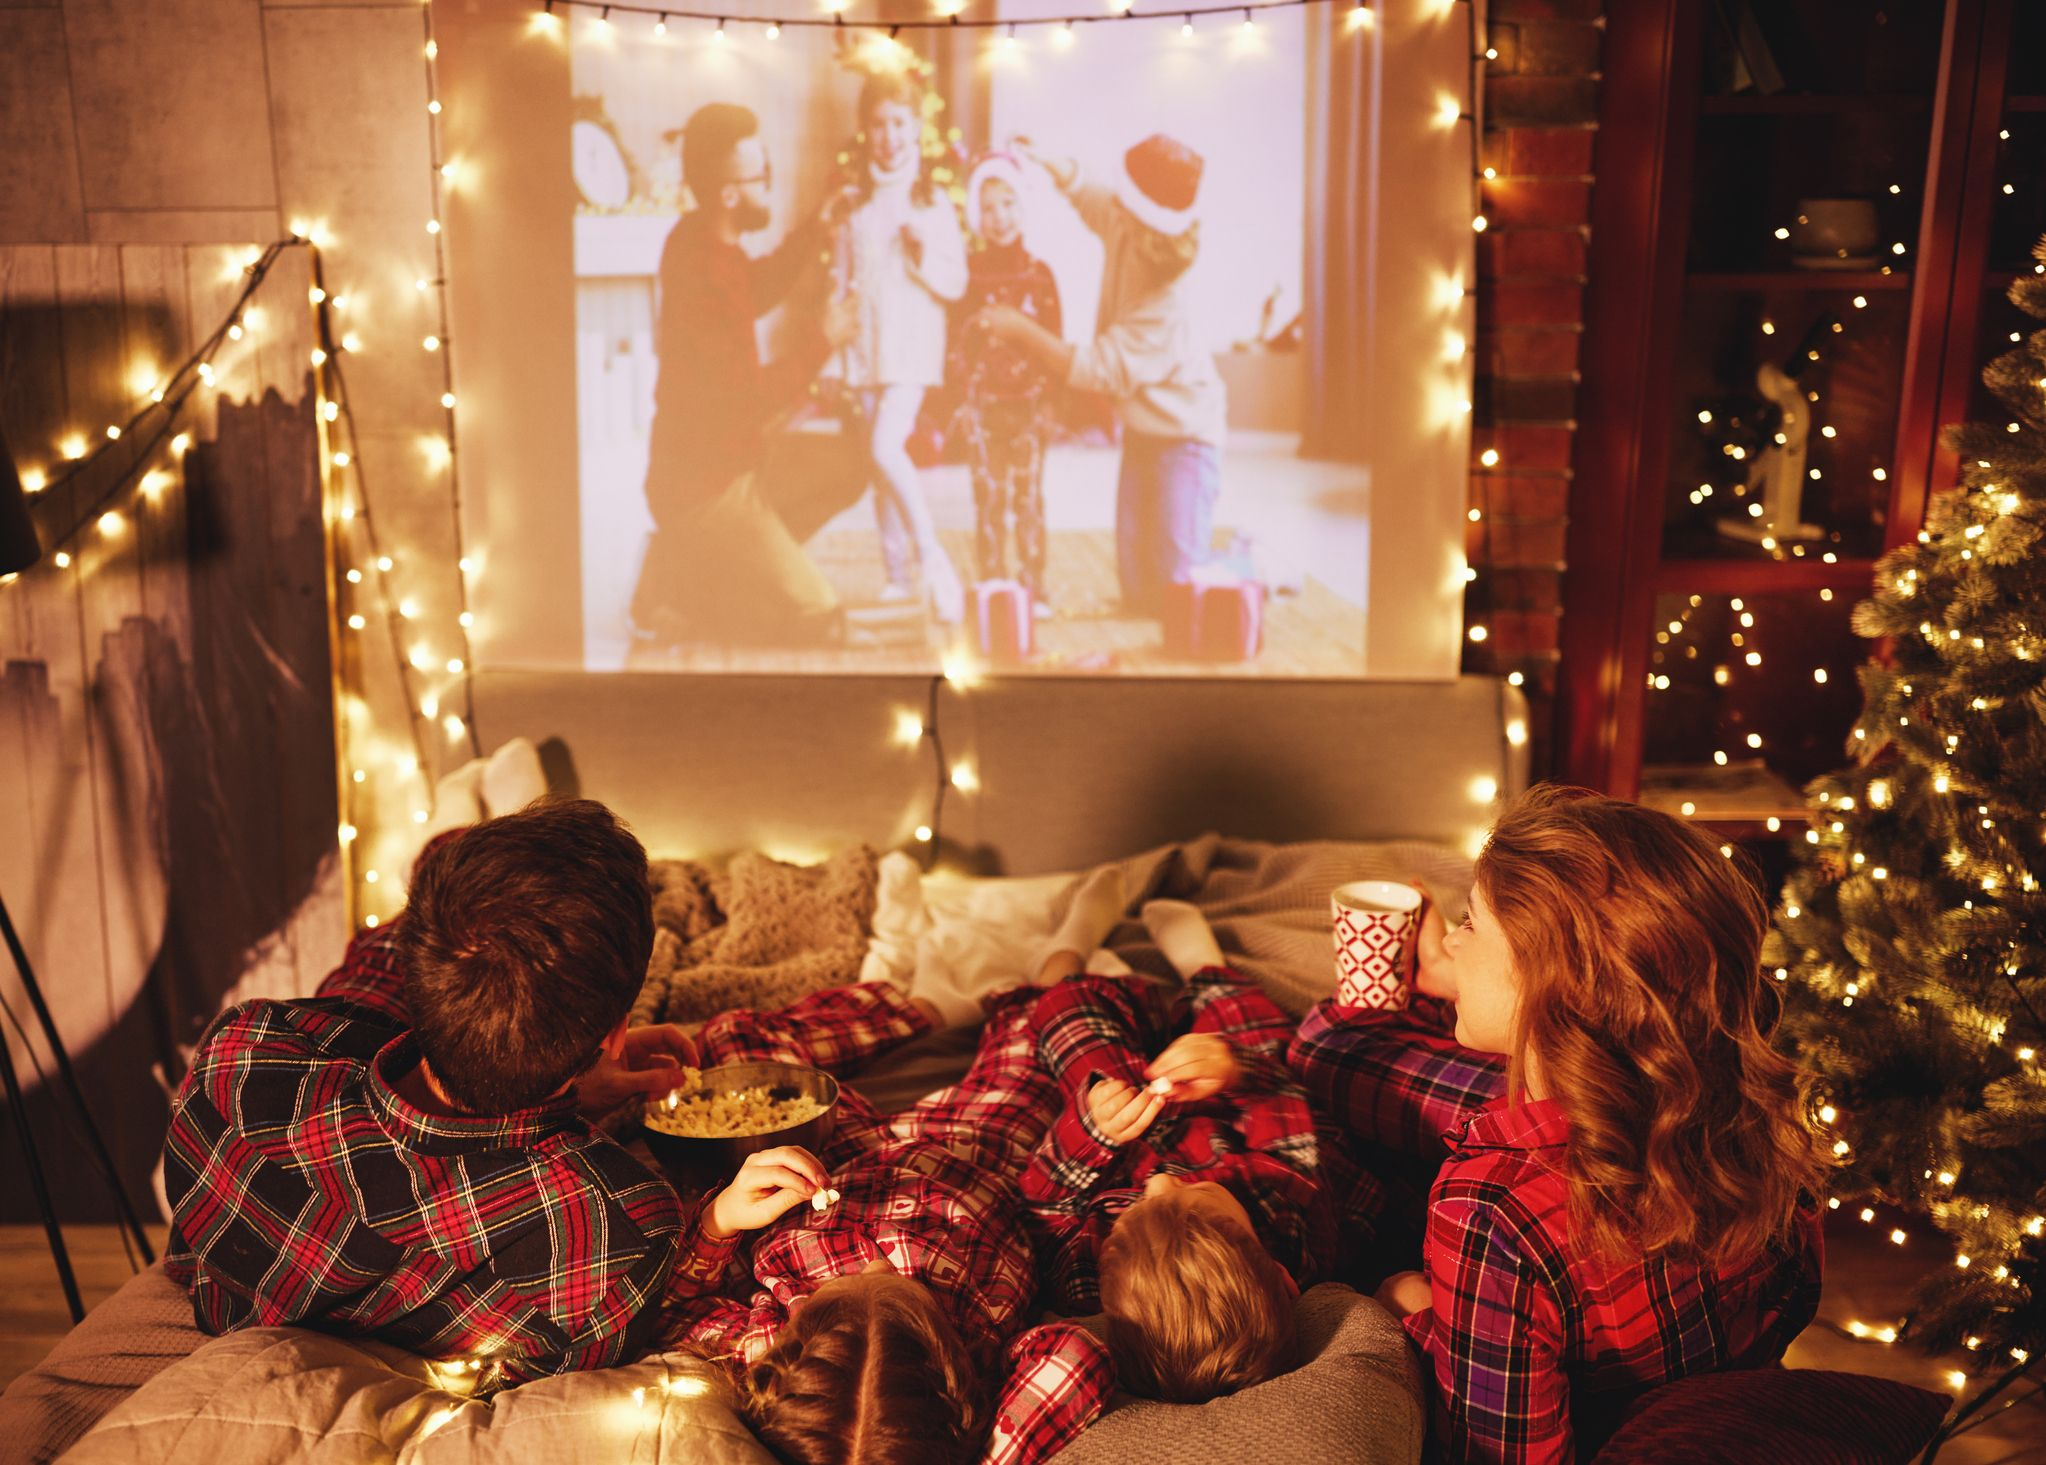 family enjoying movie playing on projector screen